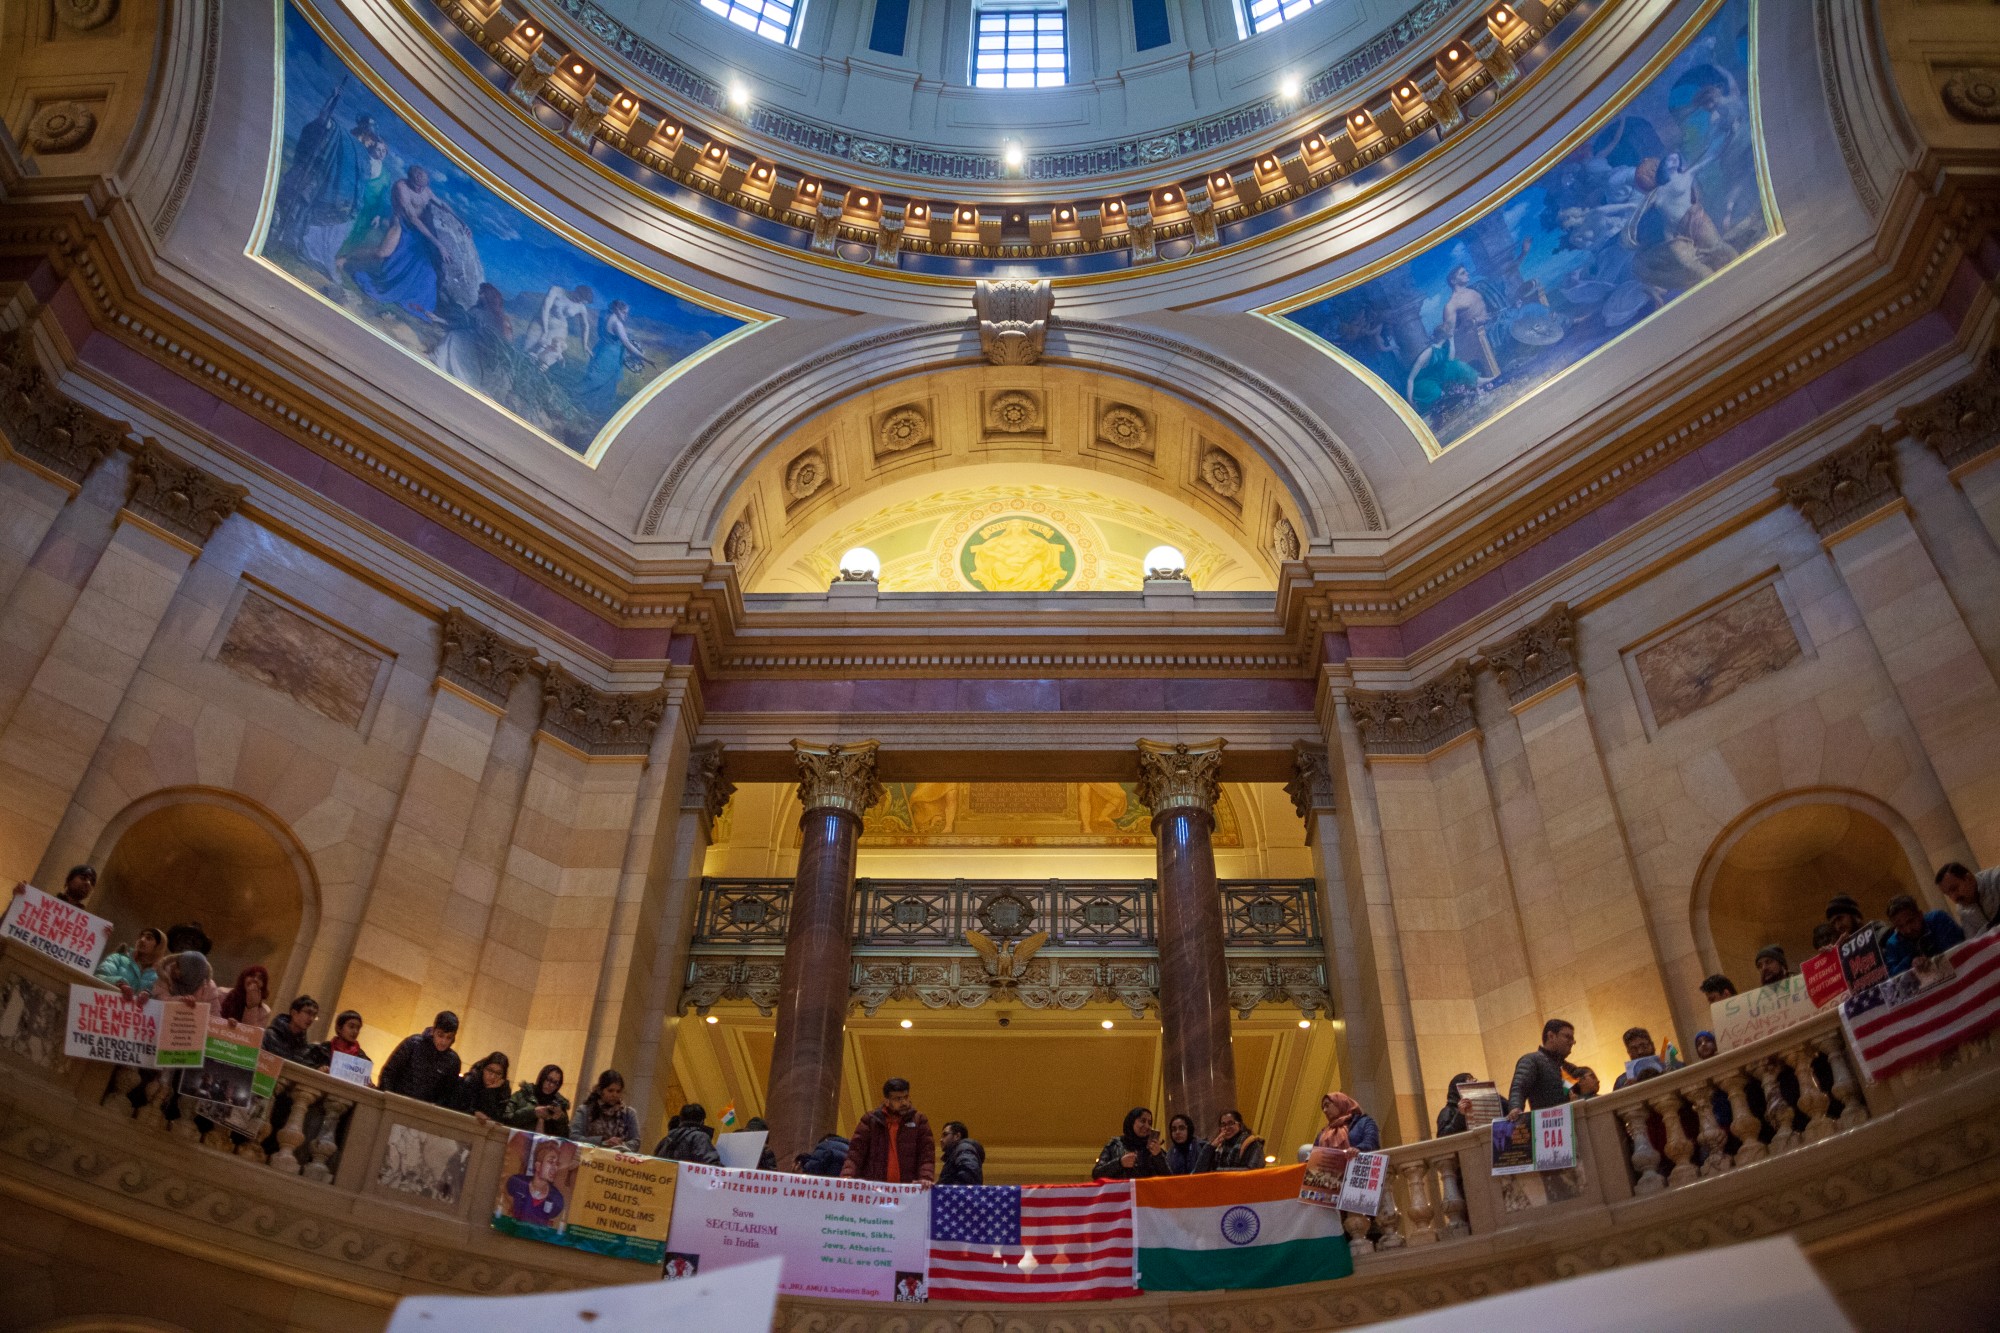 Attendees line the balconies of the rotunda at an event opposing Indias recent passage of the Citizenship Amendment Act at the Minnesota State Capitol Building on Sunday, Jan. 26. This legislation offers Indian citizenship to refugees of several religious groups, but does not apply to Muslims, despite their making up nearly 15% of the Indian population.